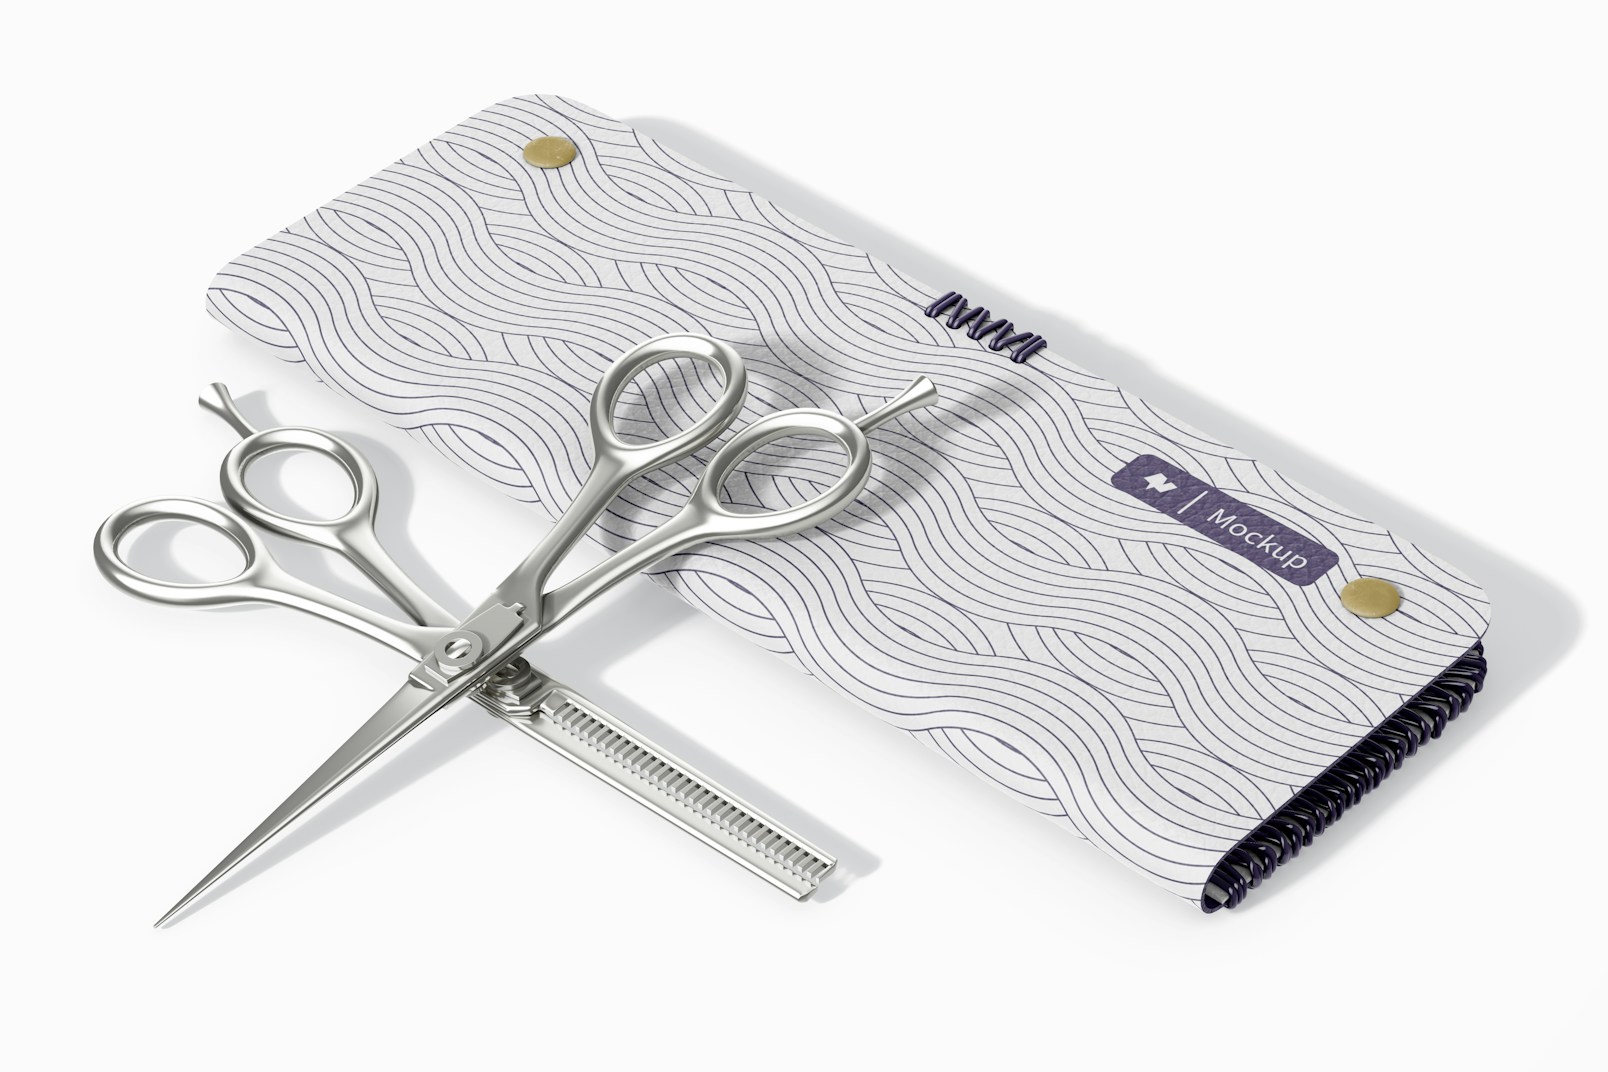 Hair Scissors With Case Mockup, Perspective